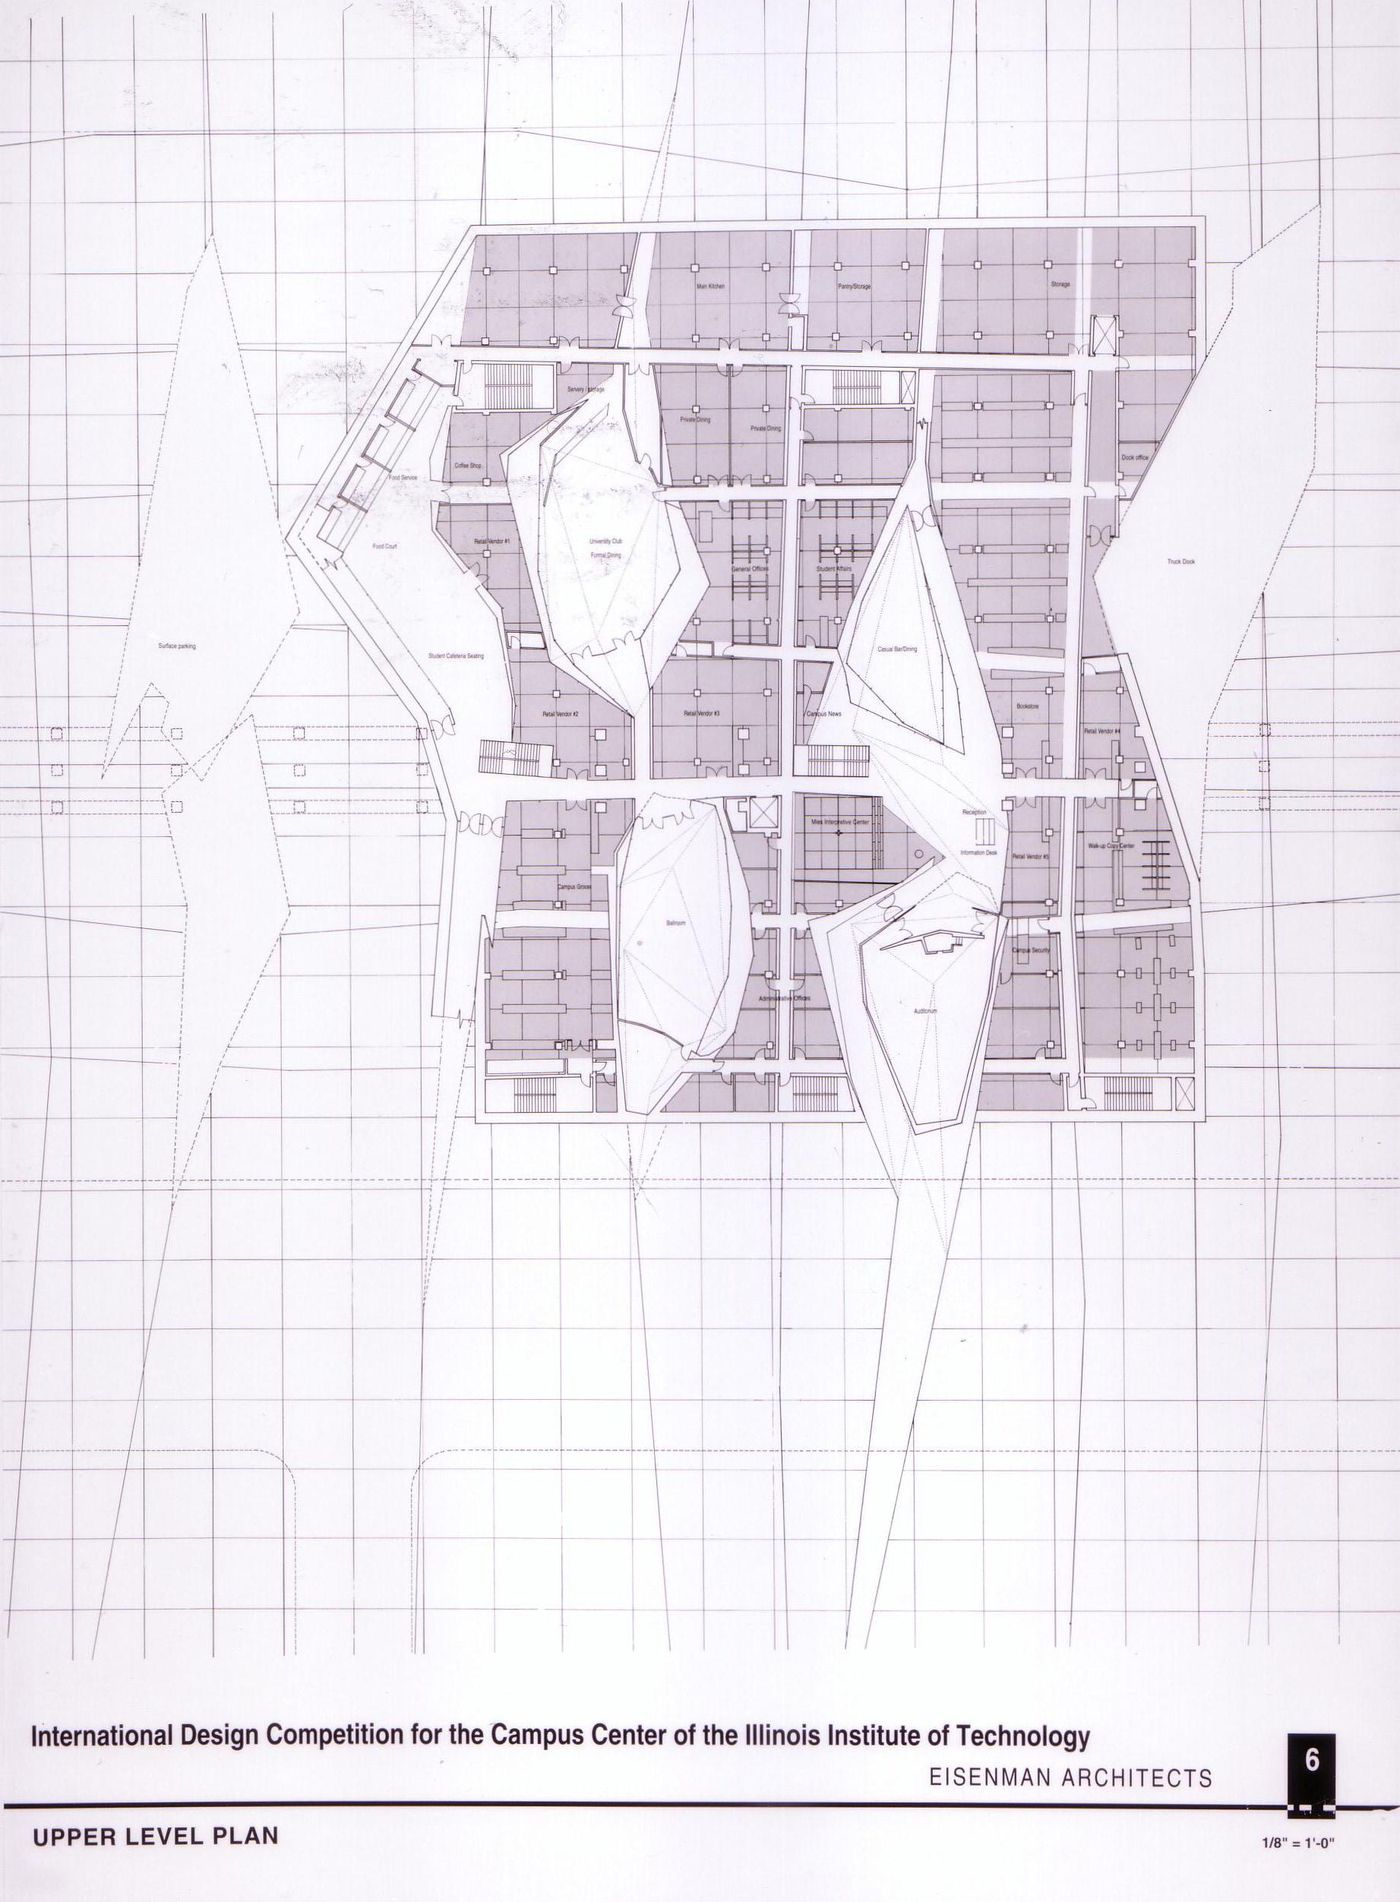 Upper level plan, submission to the Richard H. Driehaus Foundation International Design Competition for a new campus center (1997-98), Illinois Institute of Technology, Chicago, Illinois